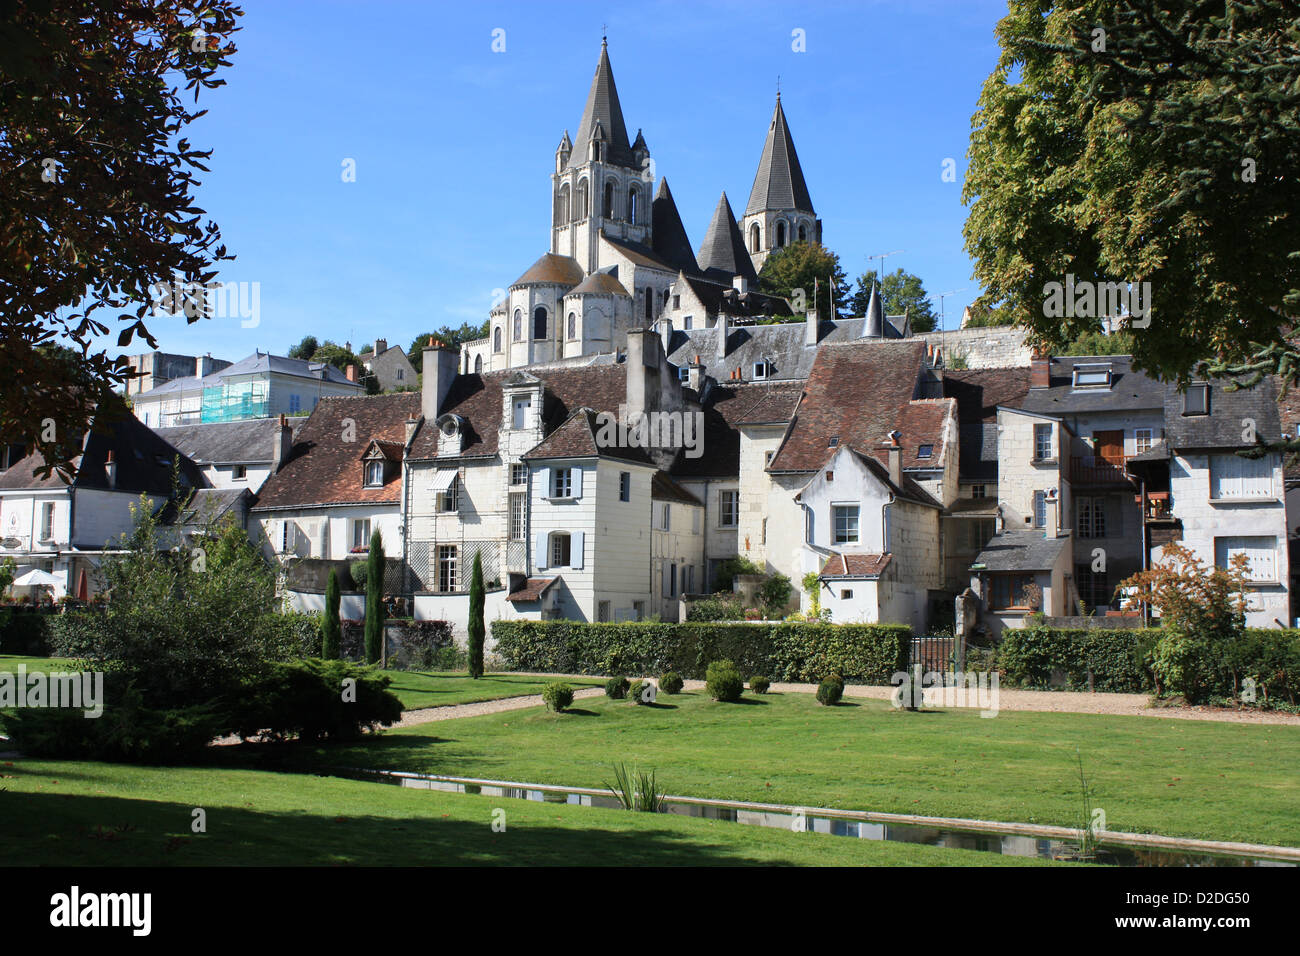 The Cite Royale of Loches in the Indre Valley, Southern Touraine, France, taken from the public gardens in summer Stock Photo